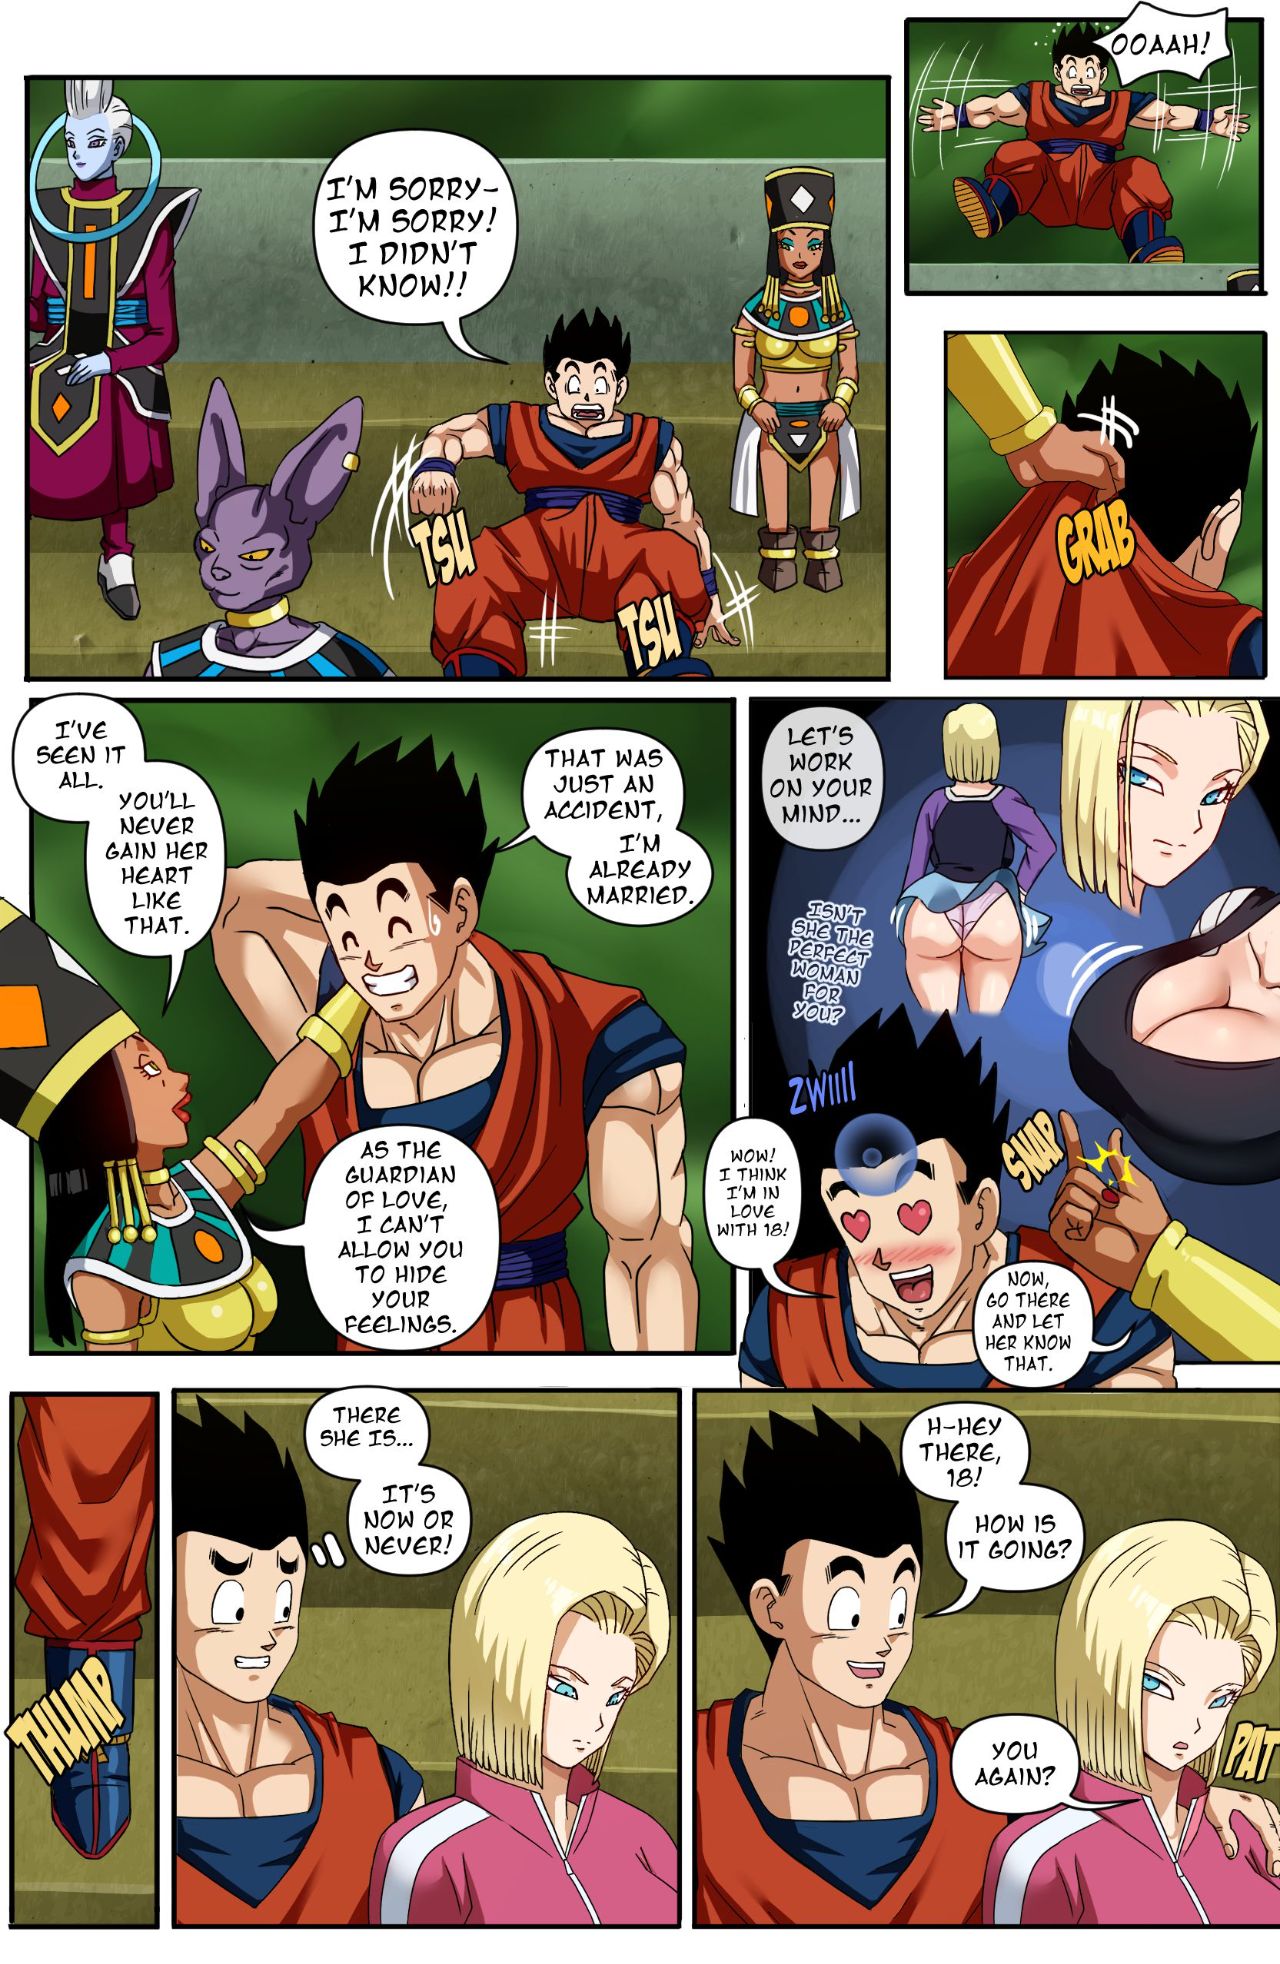 Android 18 And Gohan Part 2 Porn Comic english 04